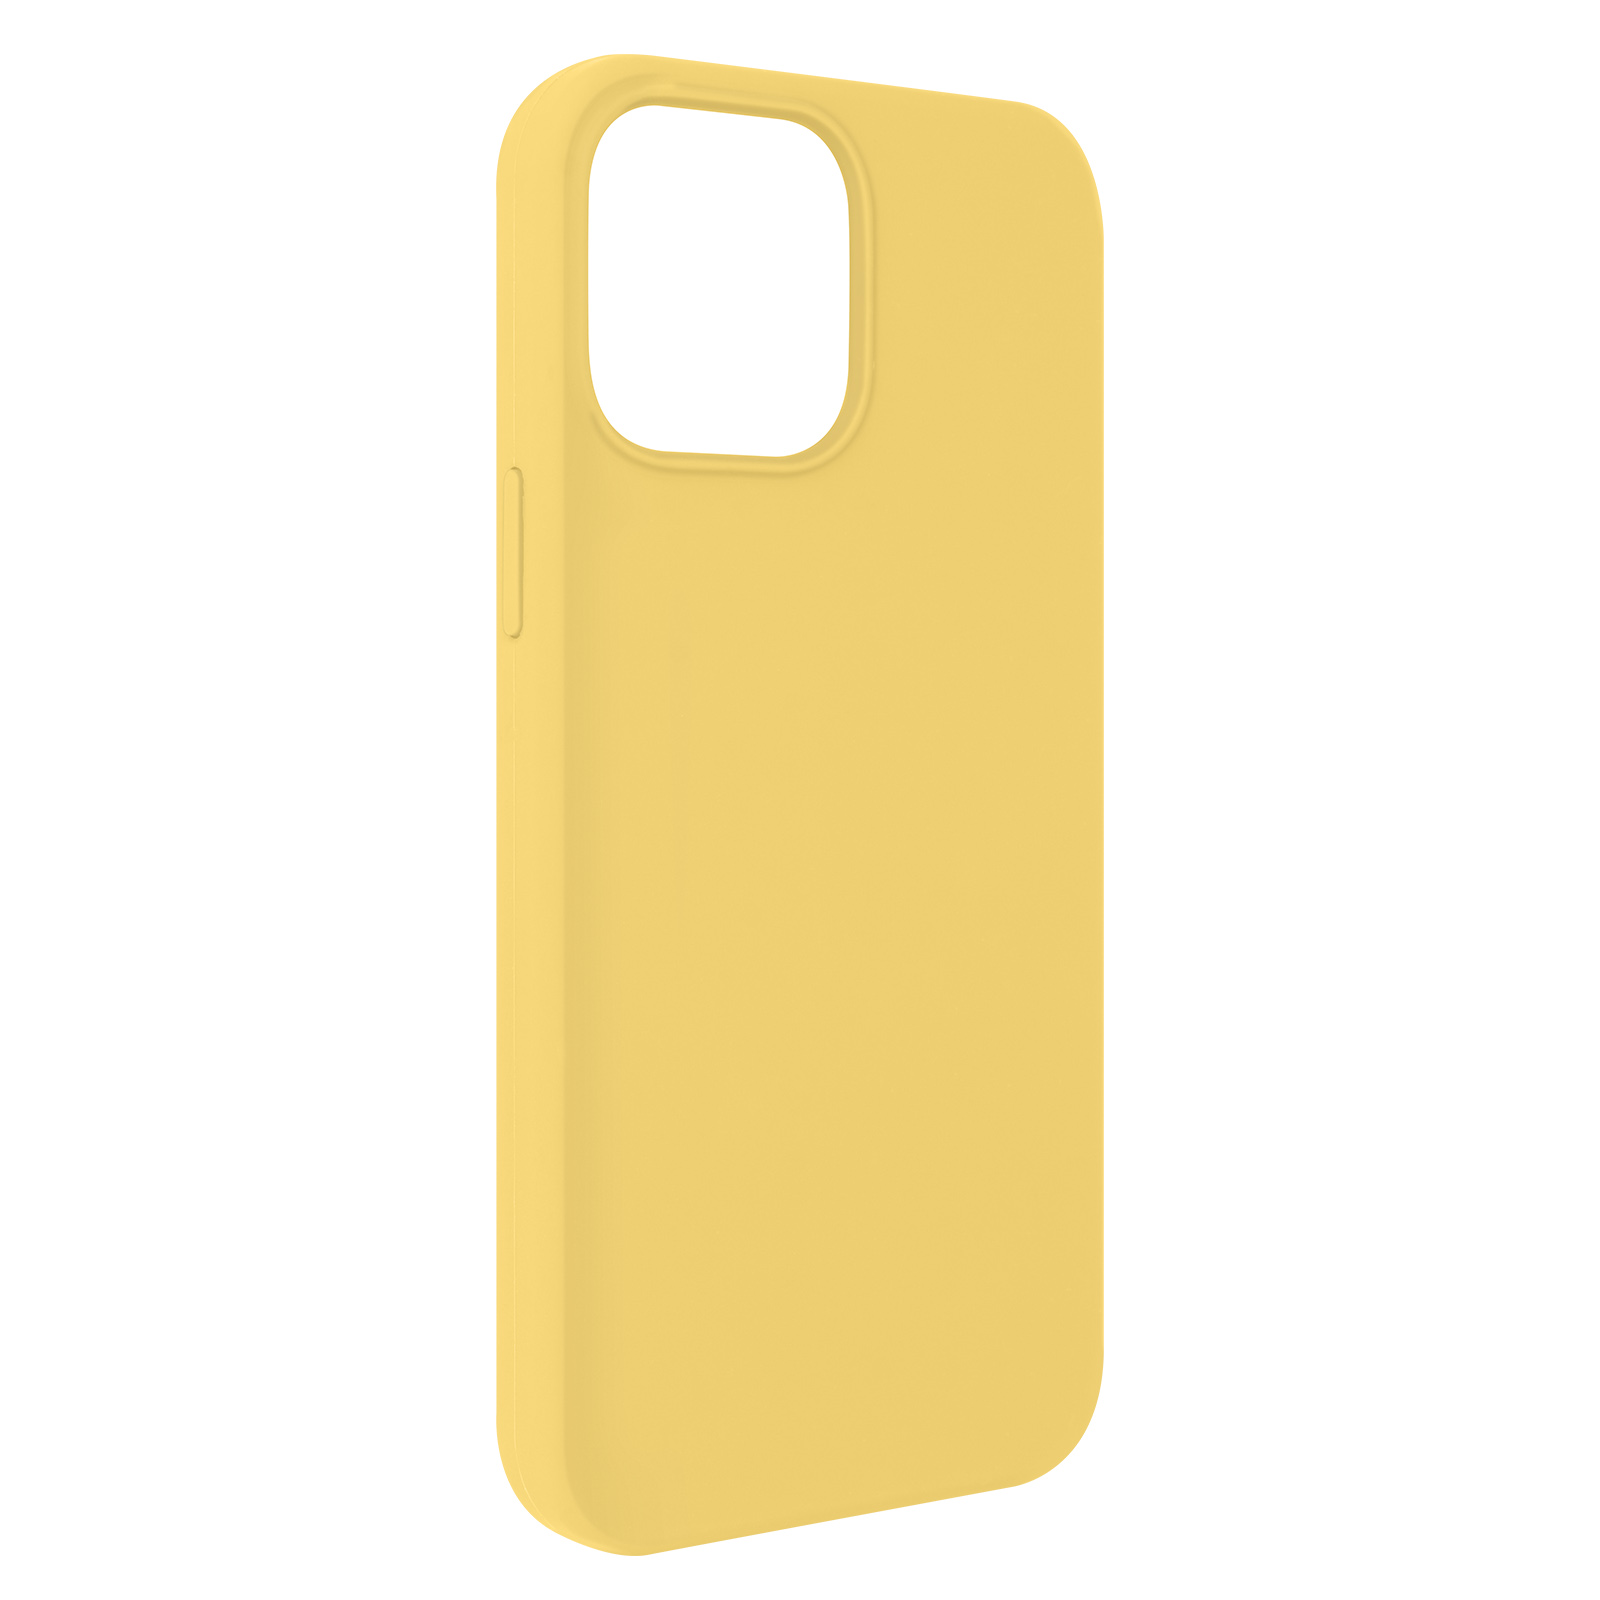 AVIZAR iPhone Backcover, 13 Apple, Gelb Series, Pro, Likid